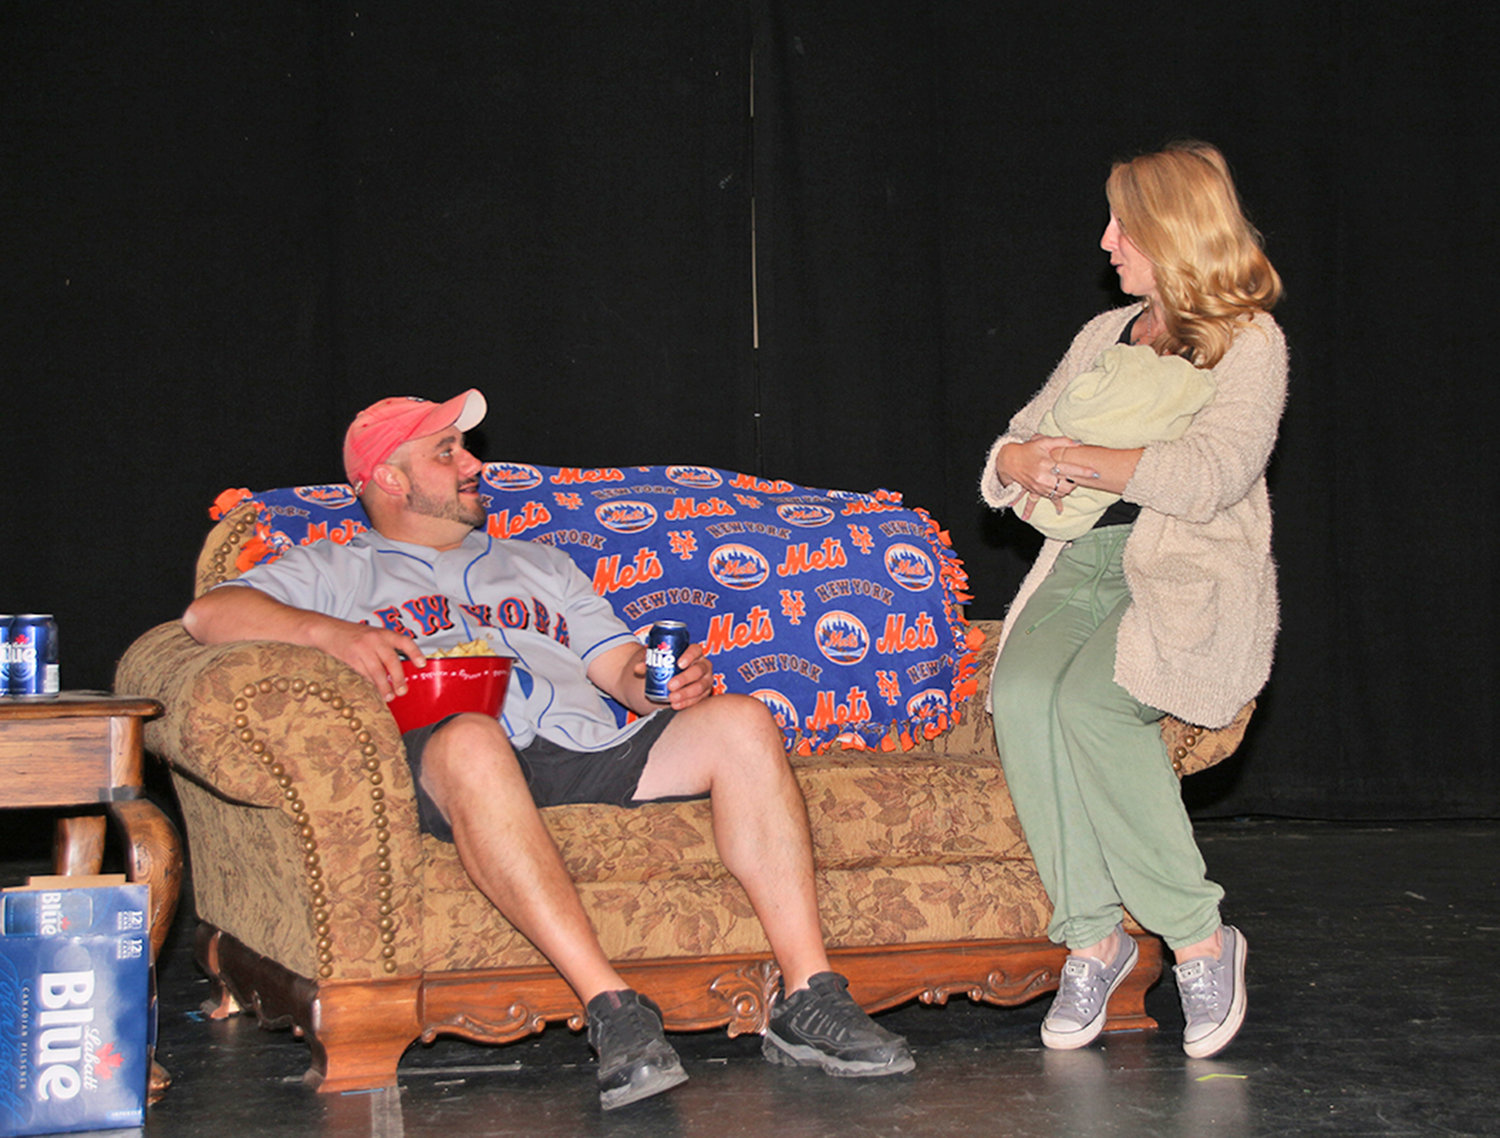 Rome Community Theater will present several one-act plays on Friday, Oct. 28, and Saturday, Oct. 29, including “The Shelf Life of Sushi,” written by William Downs. The play stars Erik Carlson, left, as Robert, and Kelly Motyl, as Hope.